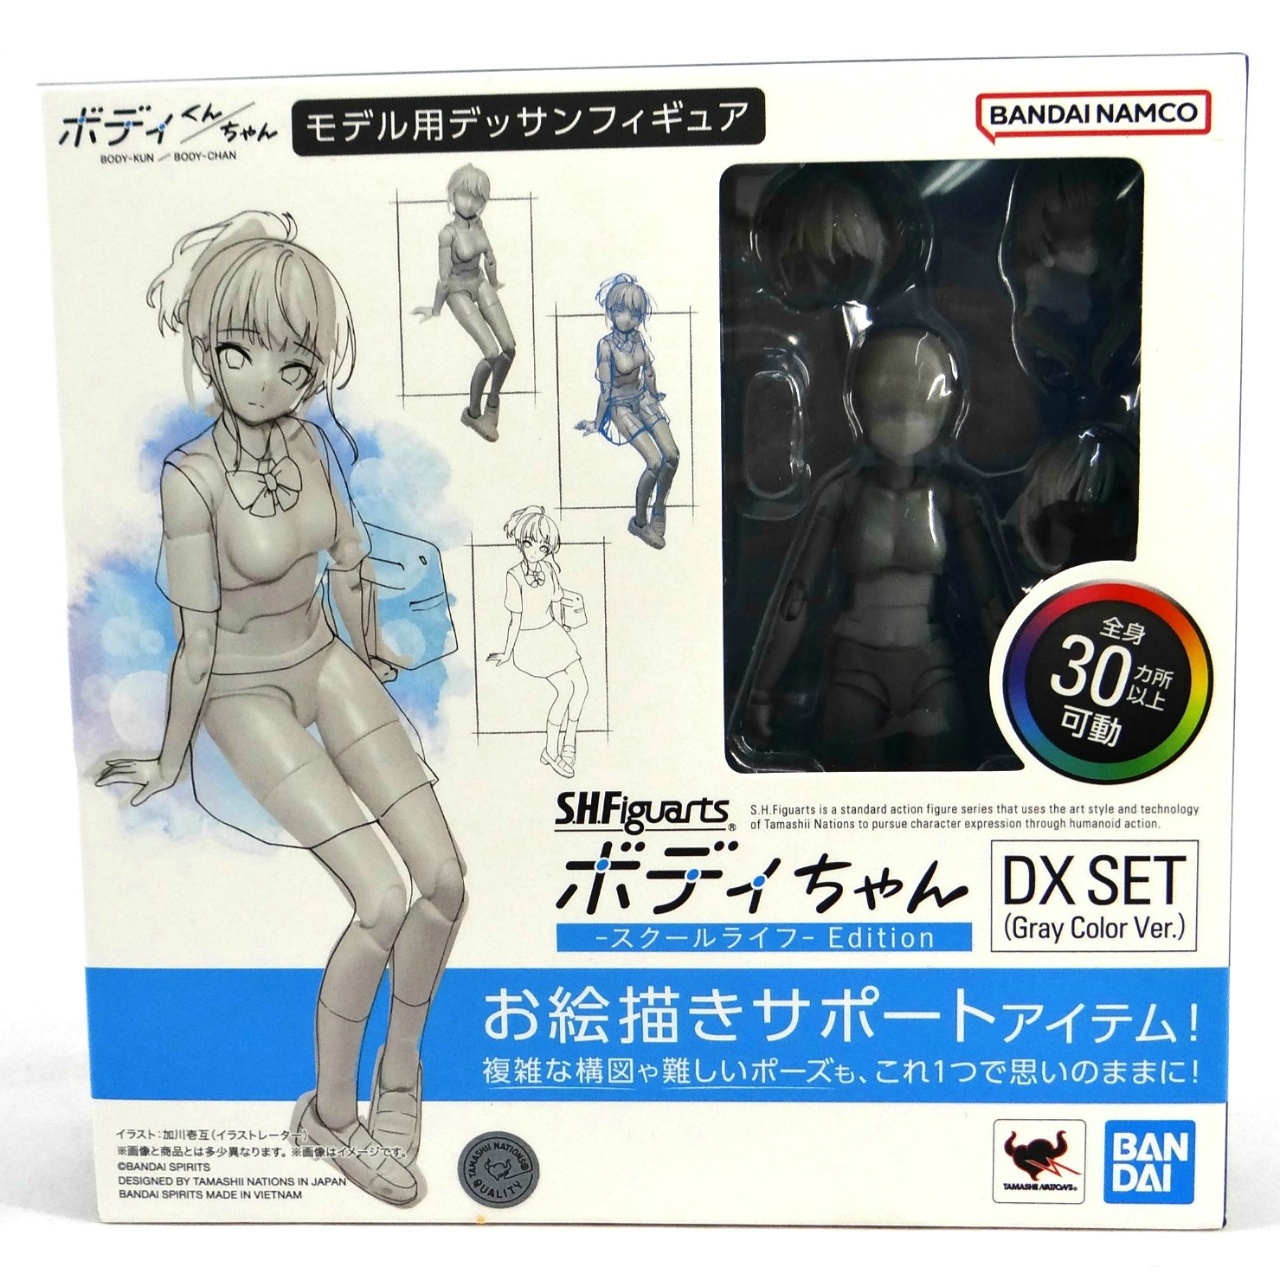 S.H.Figuarts ボディちゃん スクールライフ Edition DX SET (Gray Color Ver.)